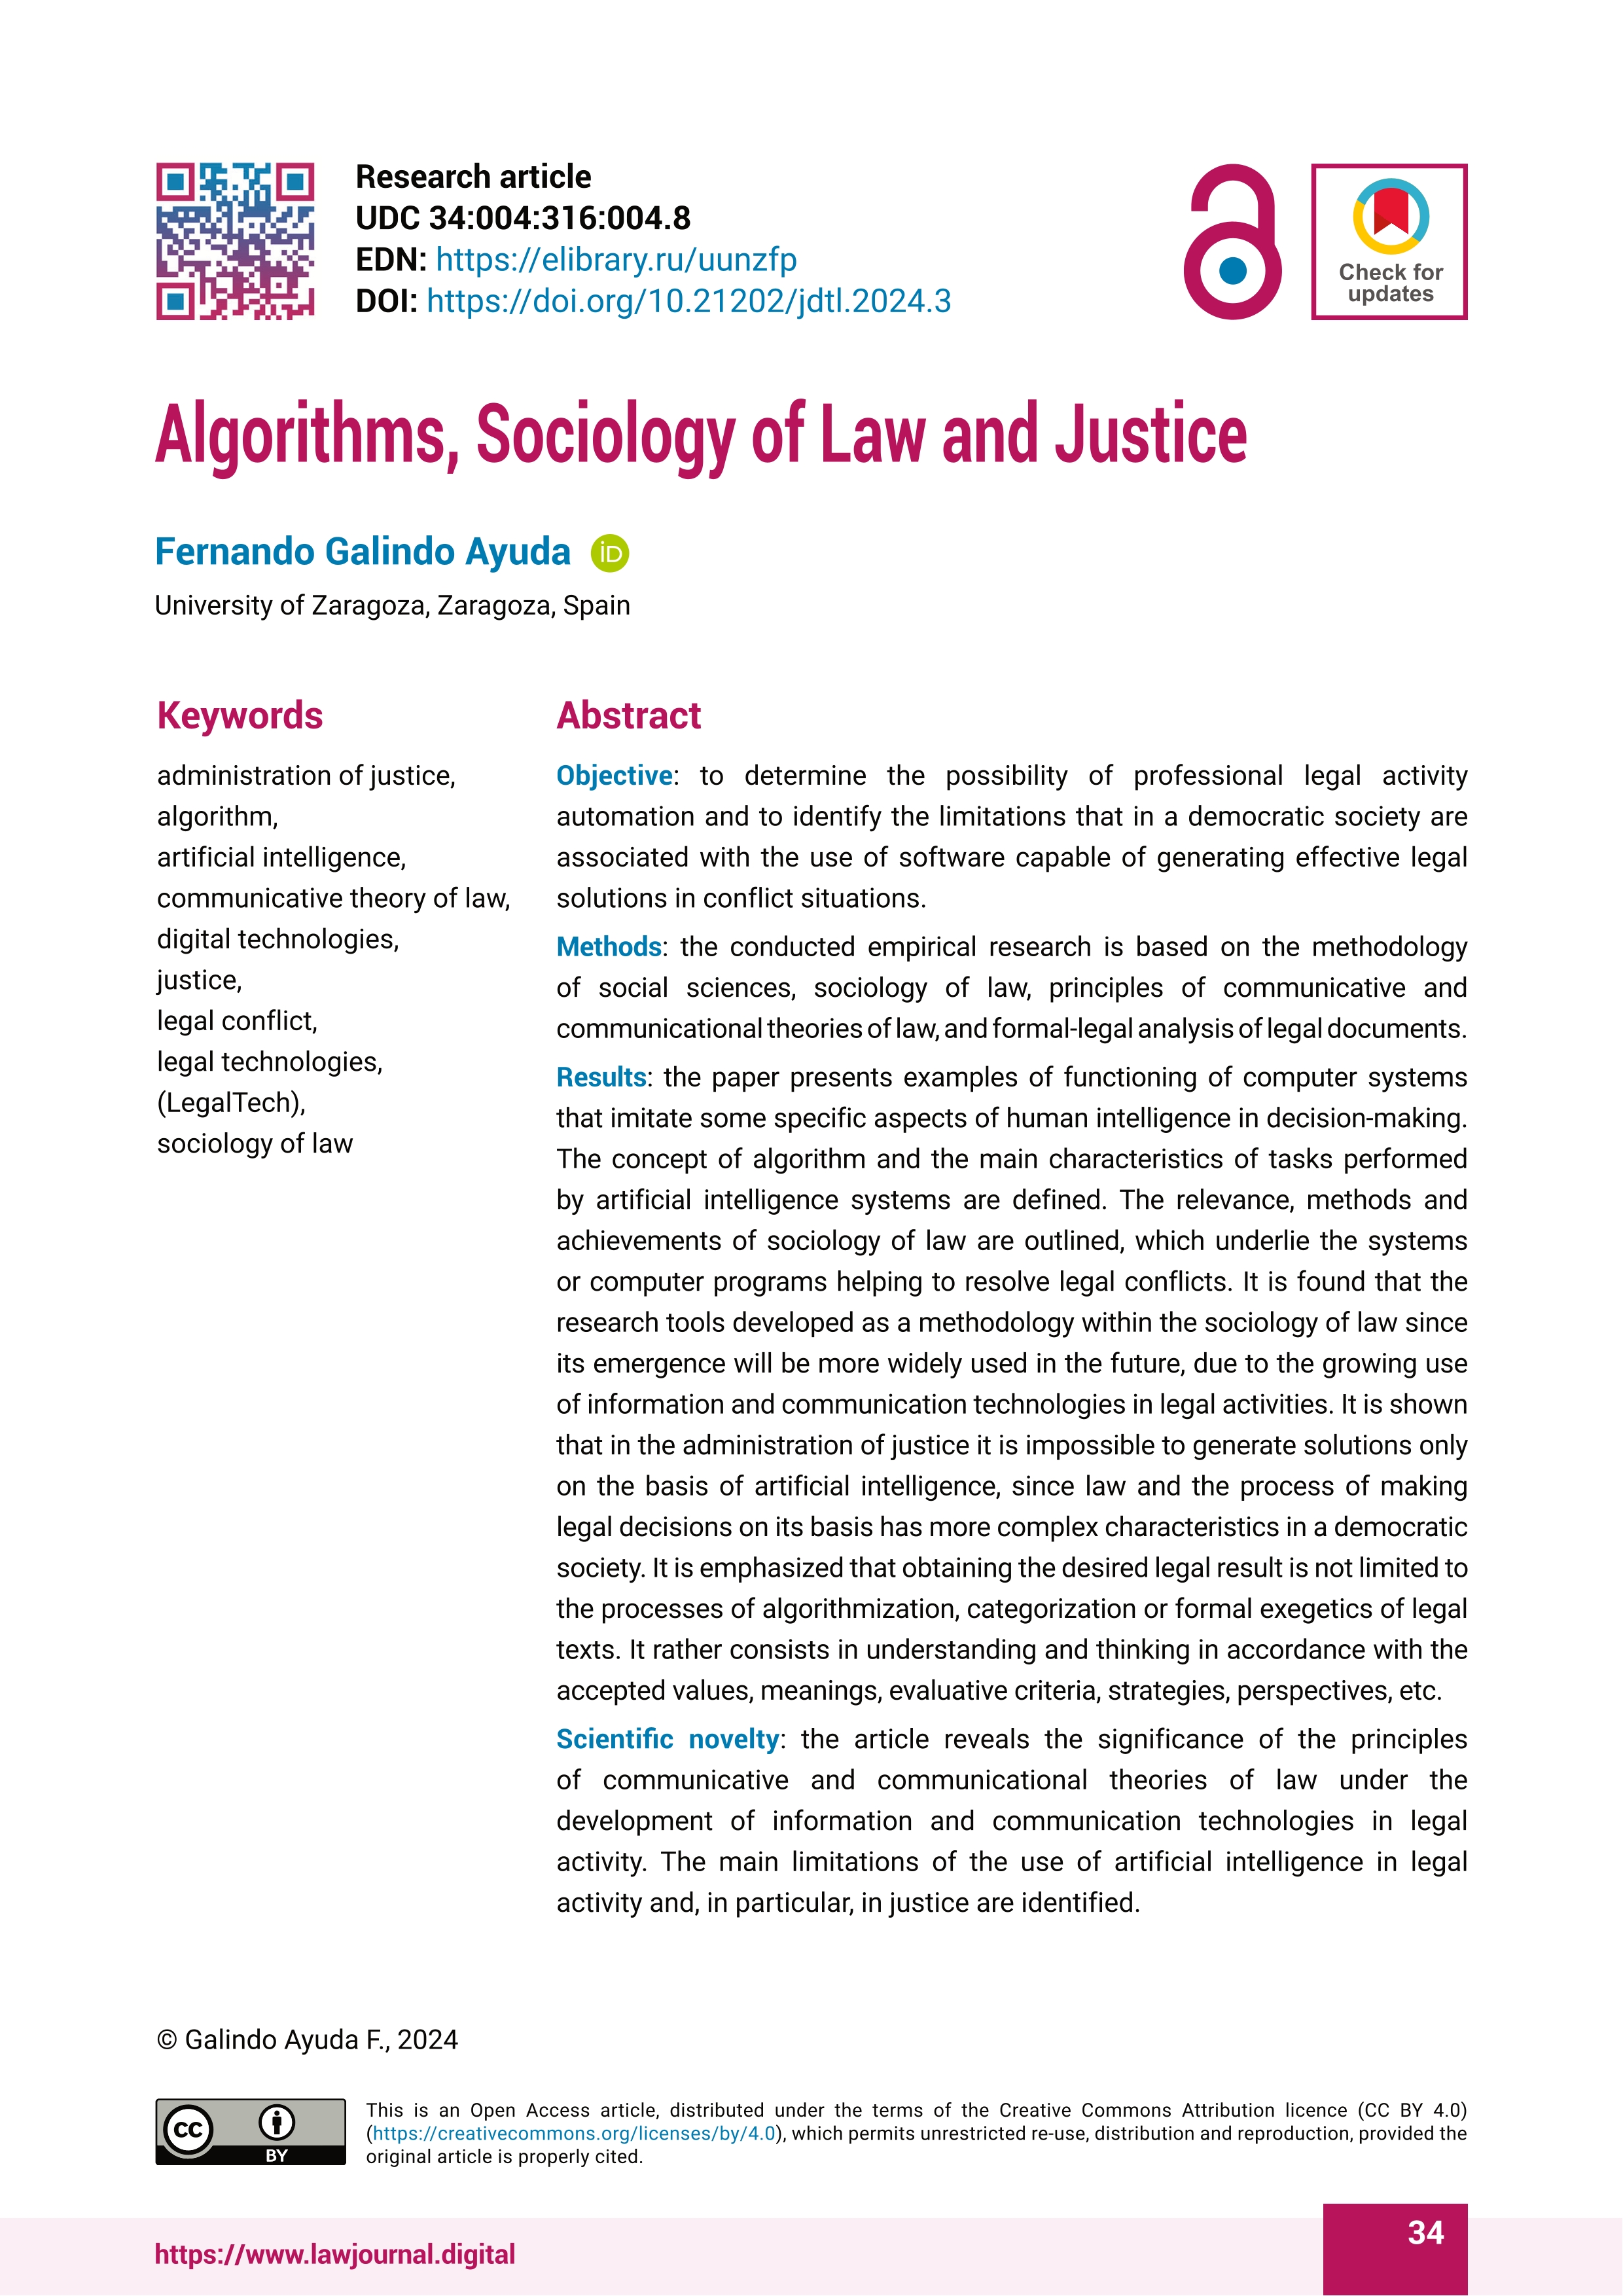 Algorithms, sociology of law and justice